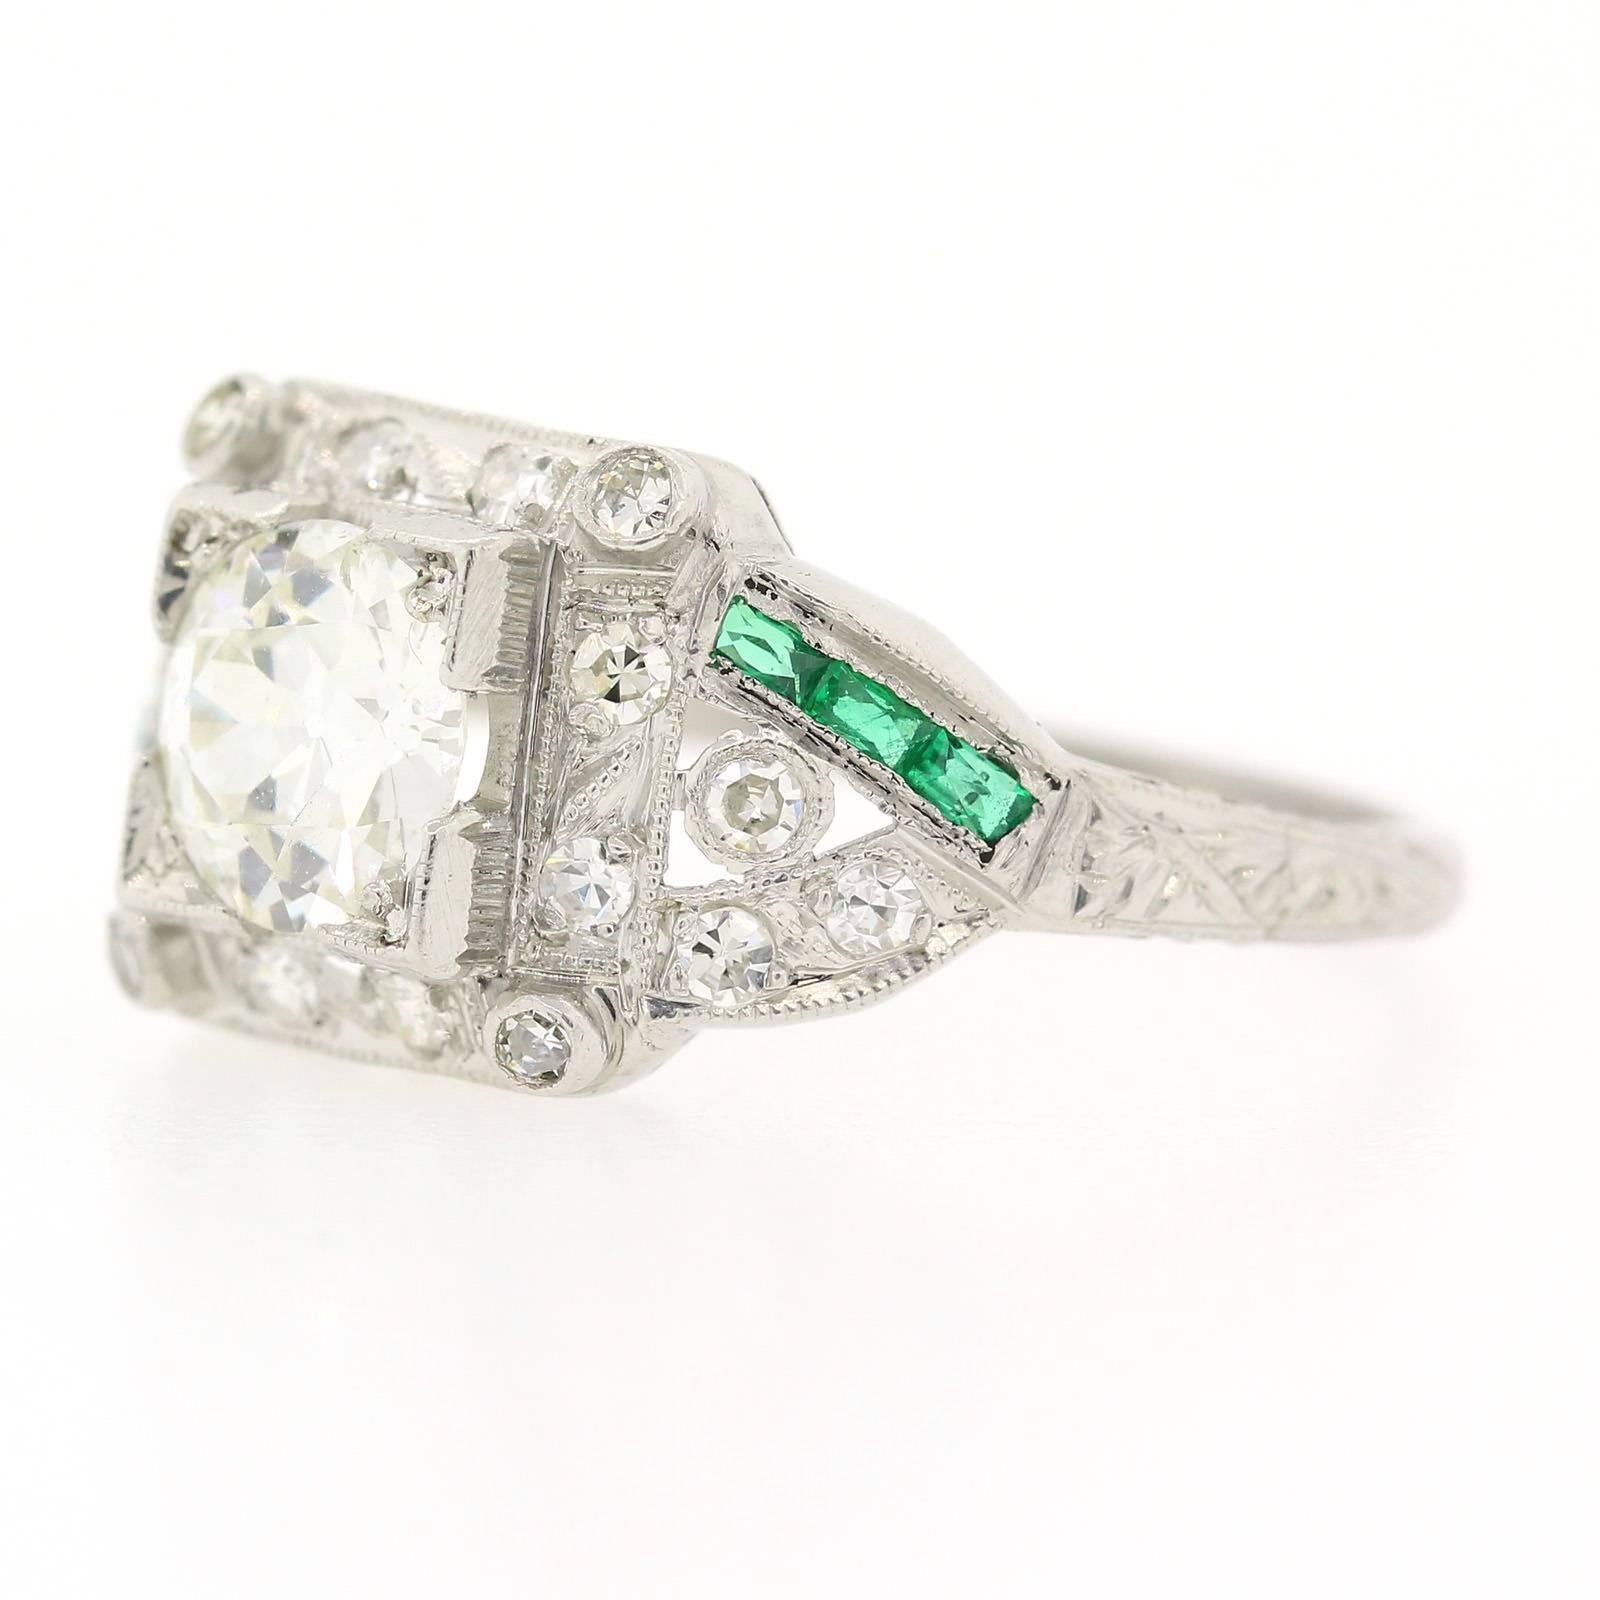 An pristine Art Deco Diamond, Emerald platinum ring featuring an 0.83 carat Old European Cut Diamond of I color - VS2 clarity.  The ring is accented with six calibrated Baguette Cut Emeralds and eighteen Single Cut Diamonds, and enhanced with time